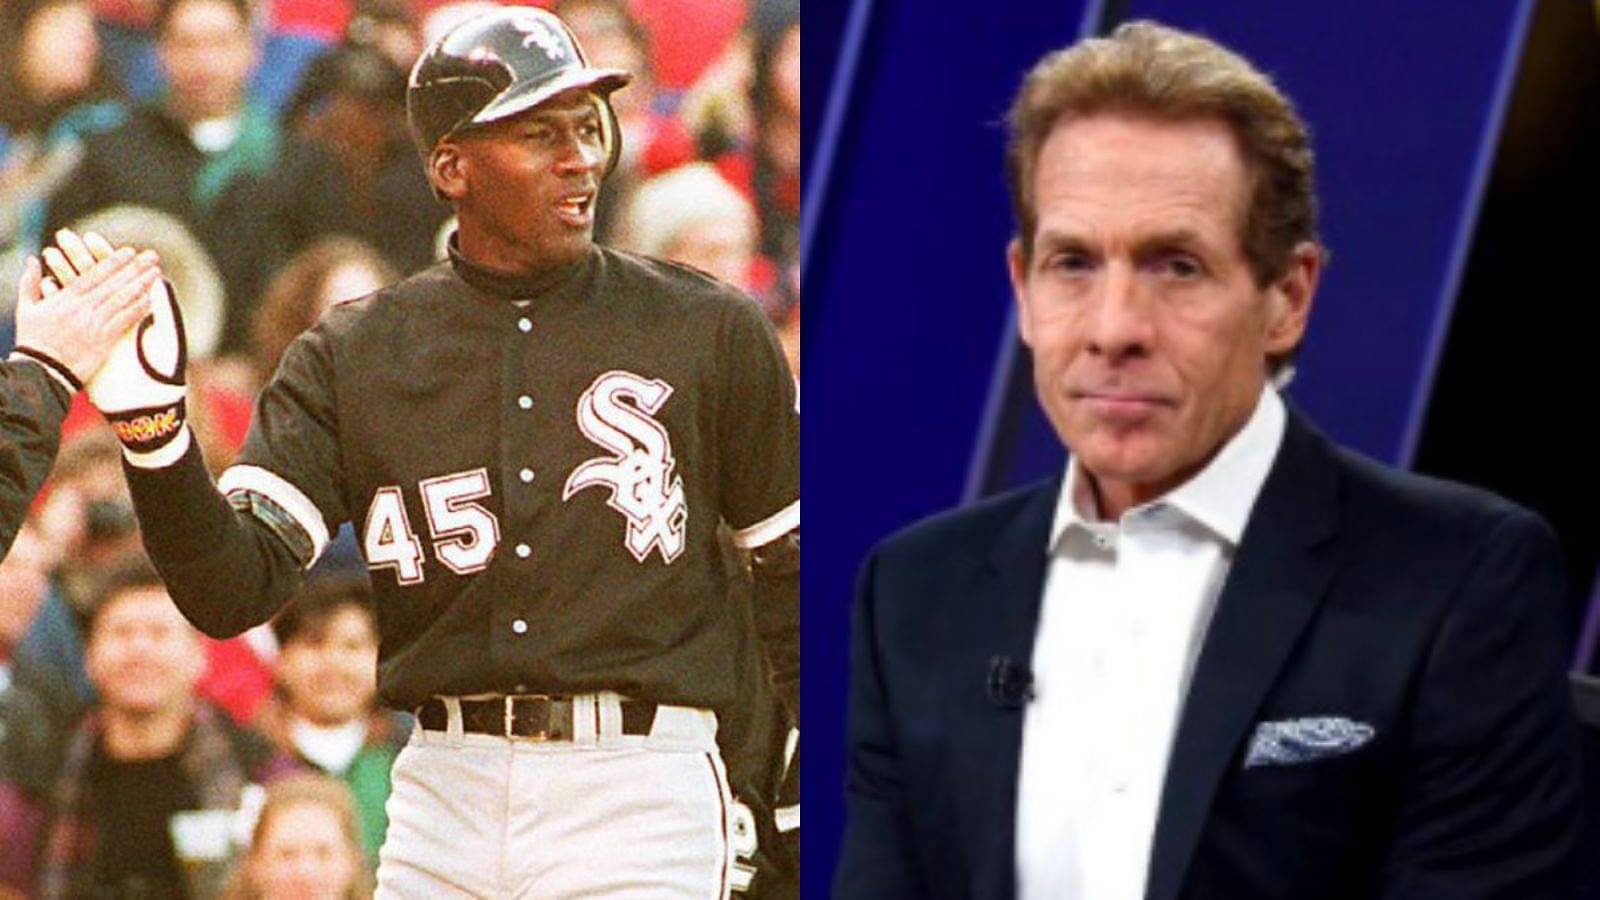 “Michael Jordan was forced out of the league in 1993”: Skip Bayless yet again claims billionaire’s 1st retirement was NBA’s response to deal with his gambling addiction